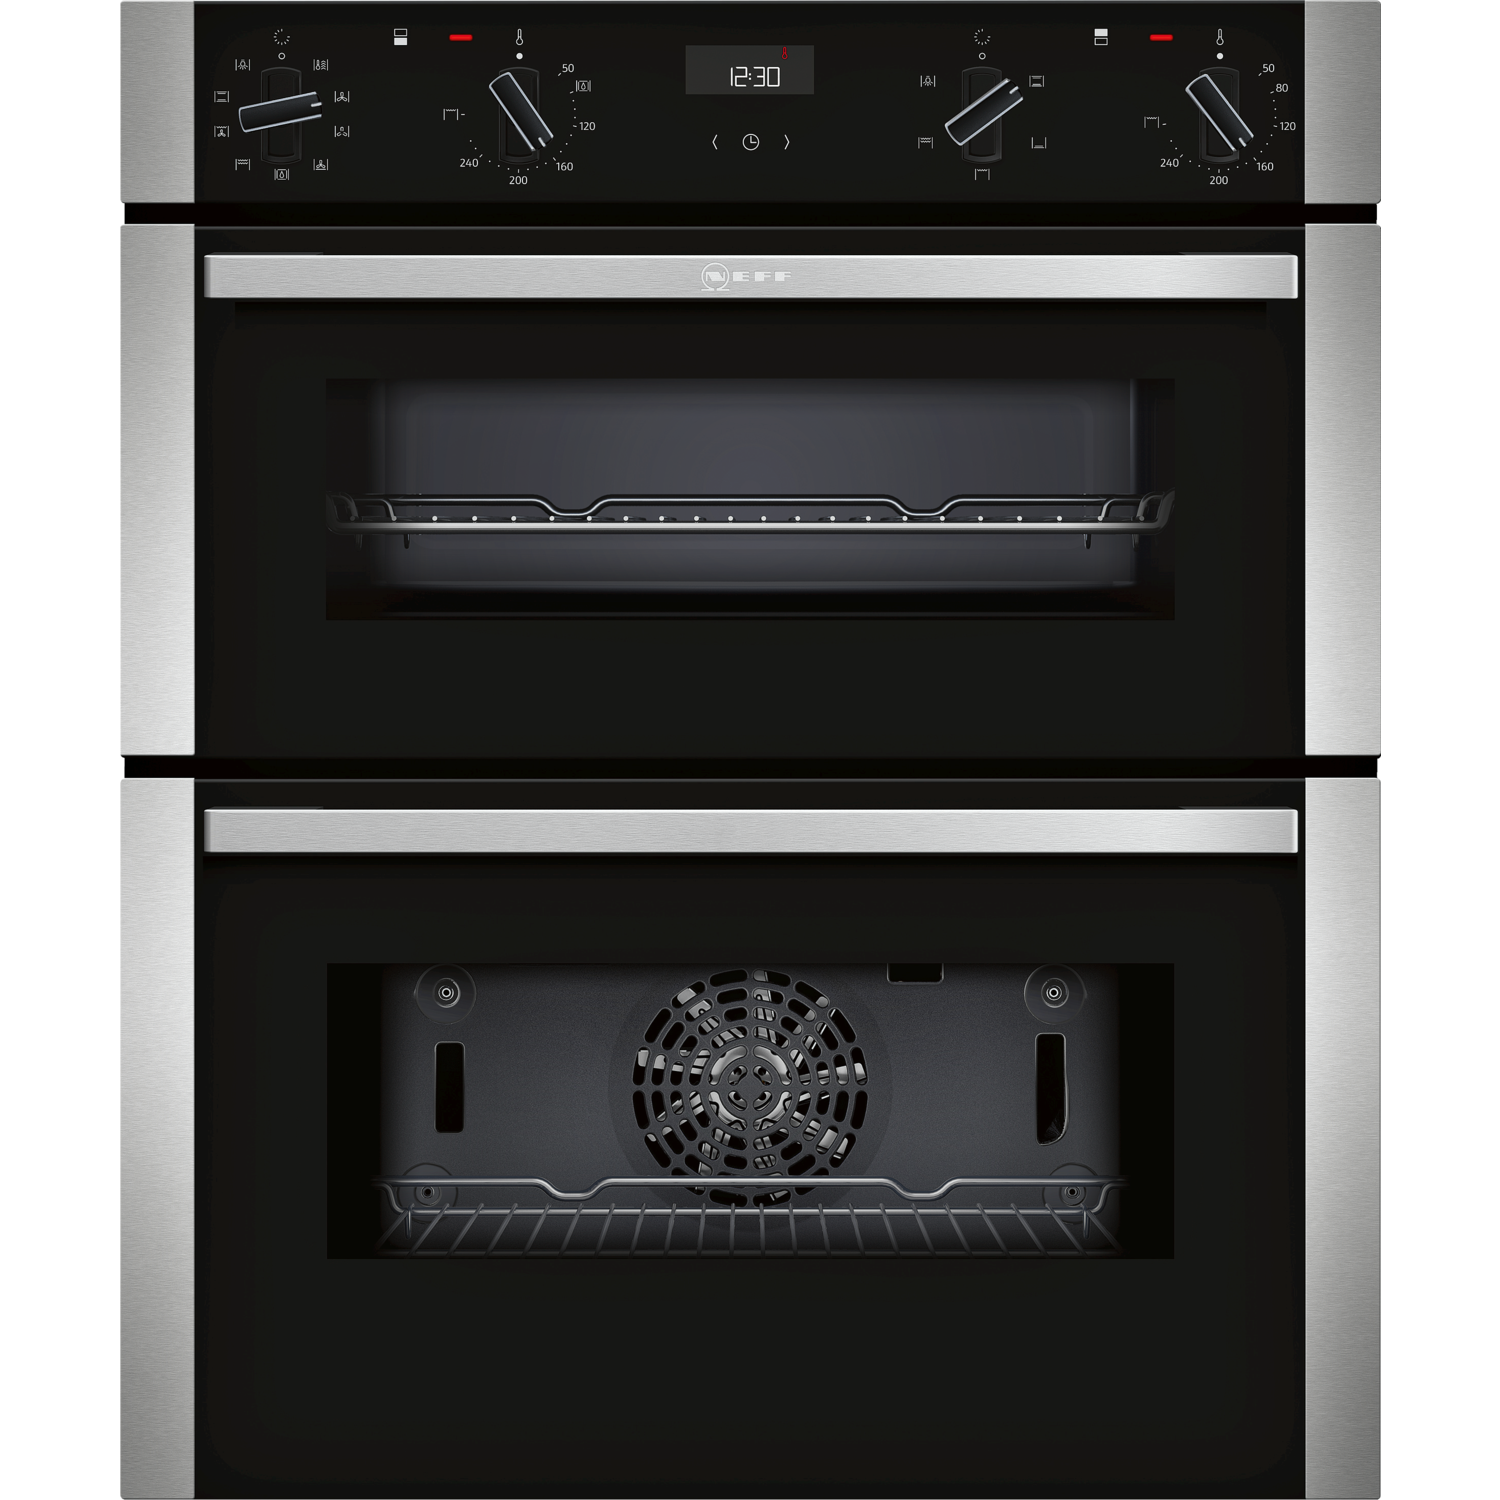 Refurbished Neff J1ACE2HN0B N50 6 Function Built-under Double Oven With LCD Display Stainless Steel